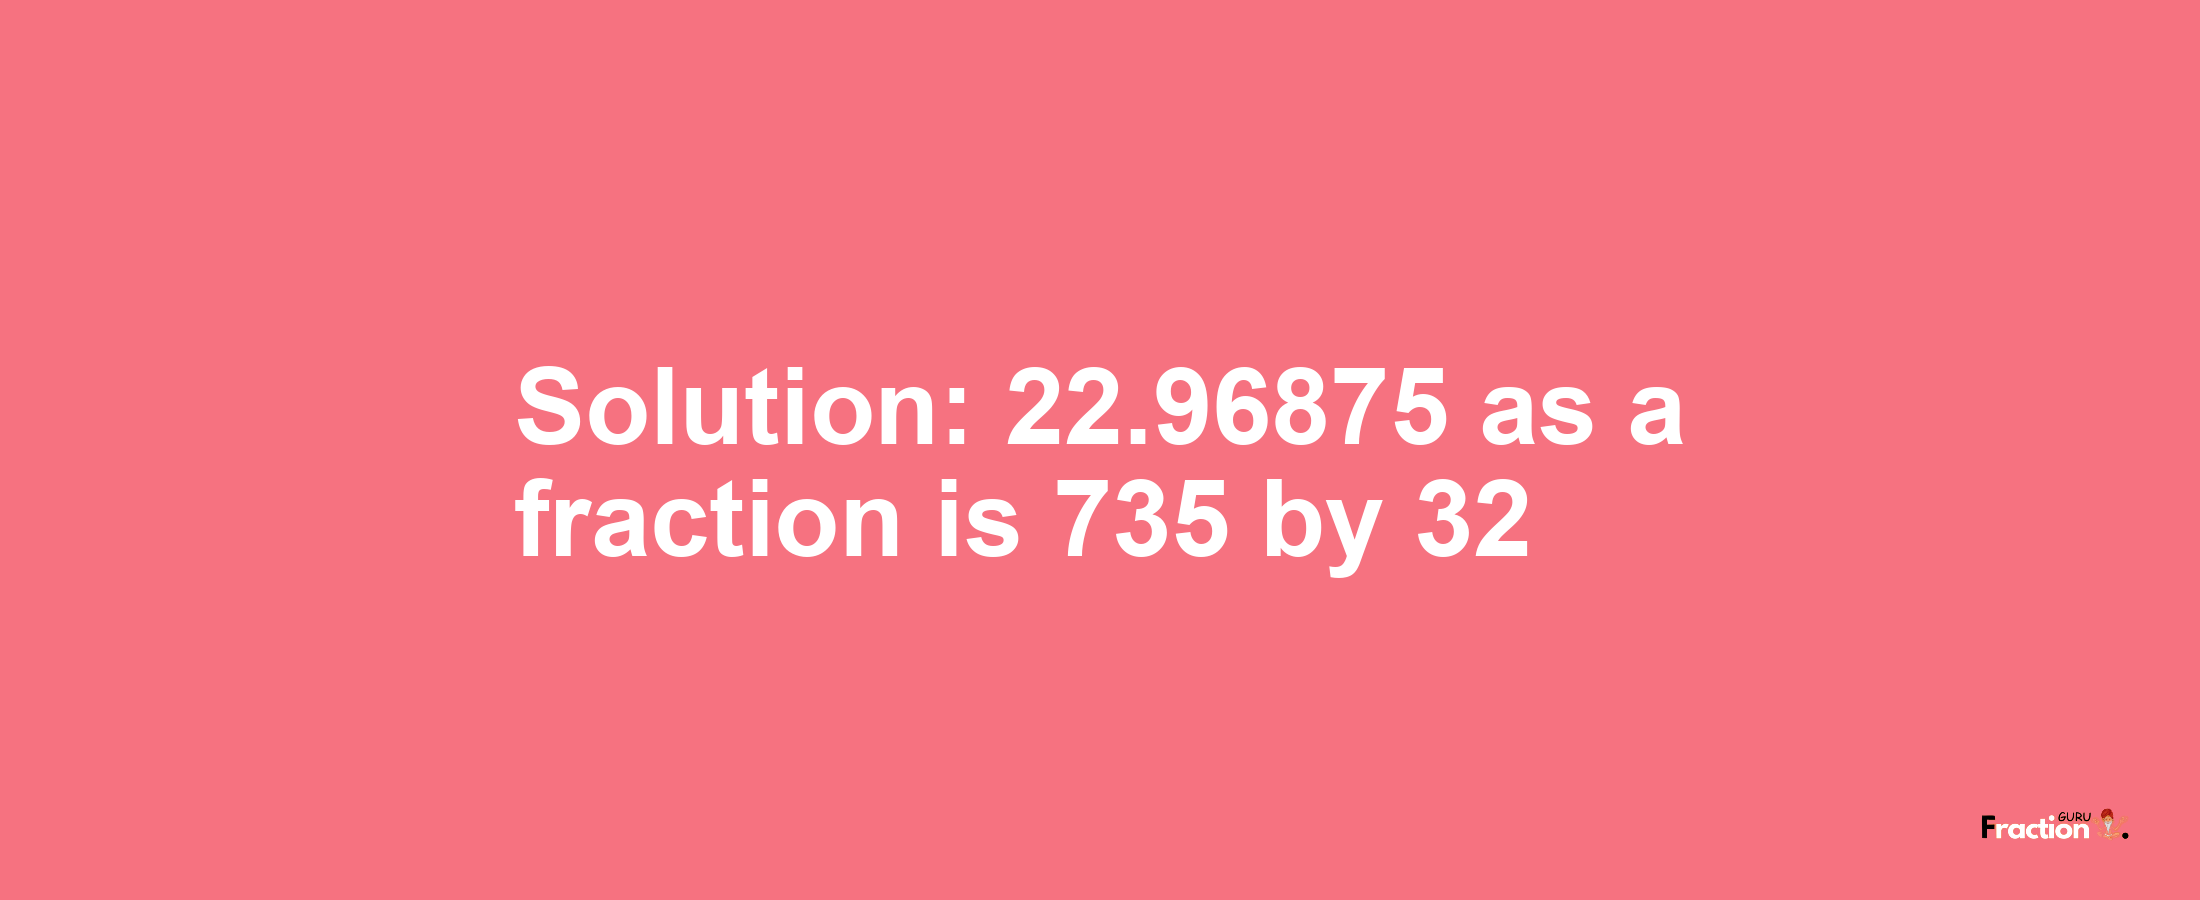 Solution:22.96875 as a fraction is 735/32